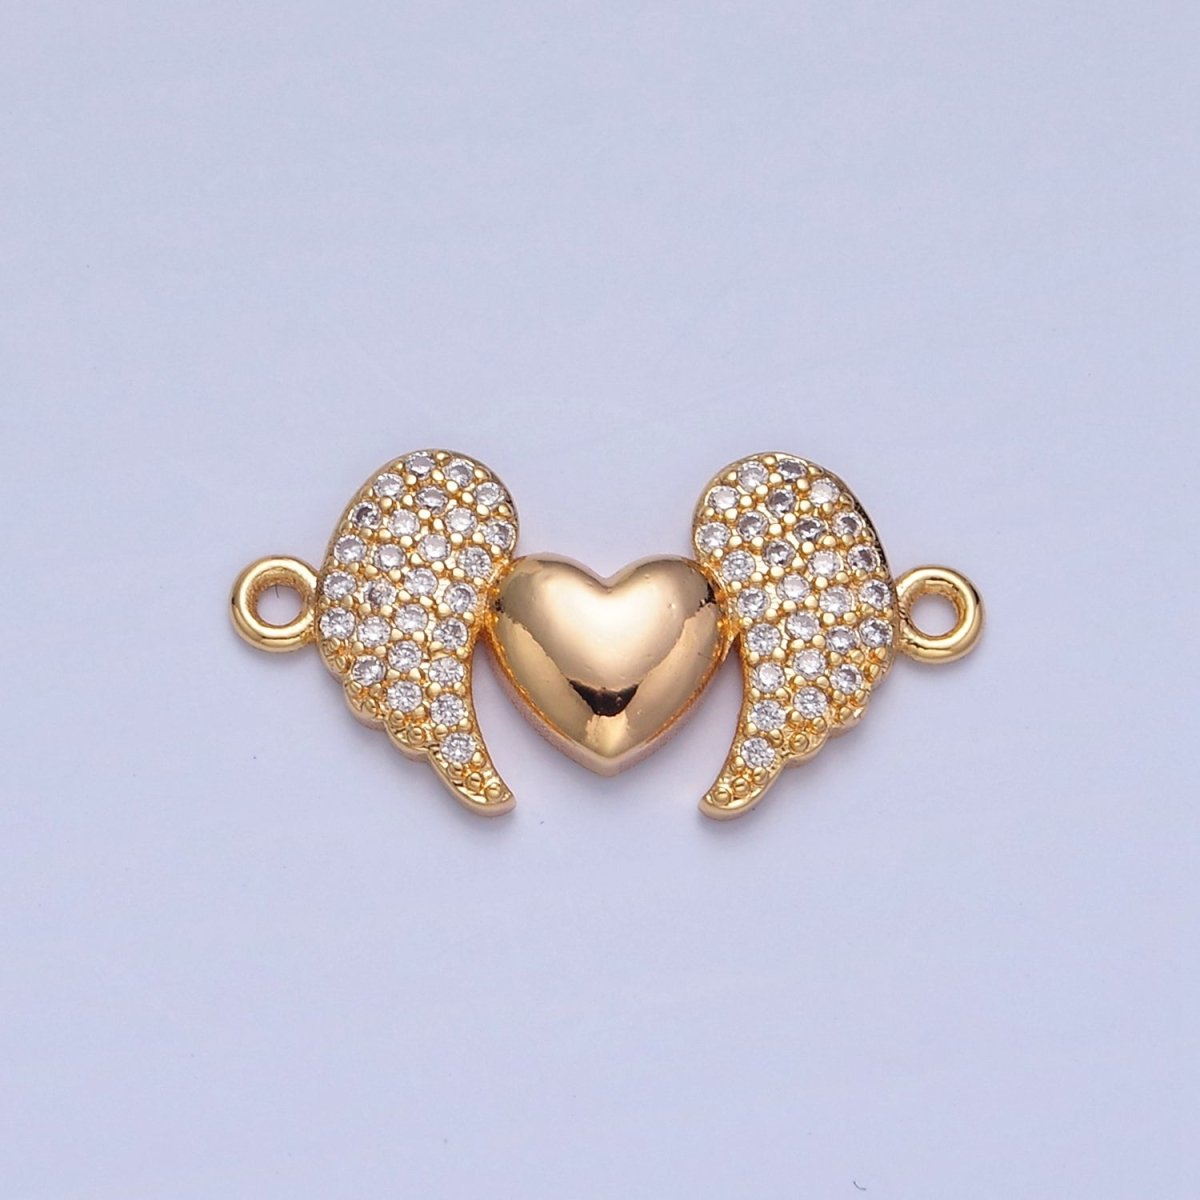 Dainty Angel Wing Heart CZ Gold Pave Charm Connector for Bracelet Necklace Supply F-416 - DLUXCA